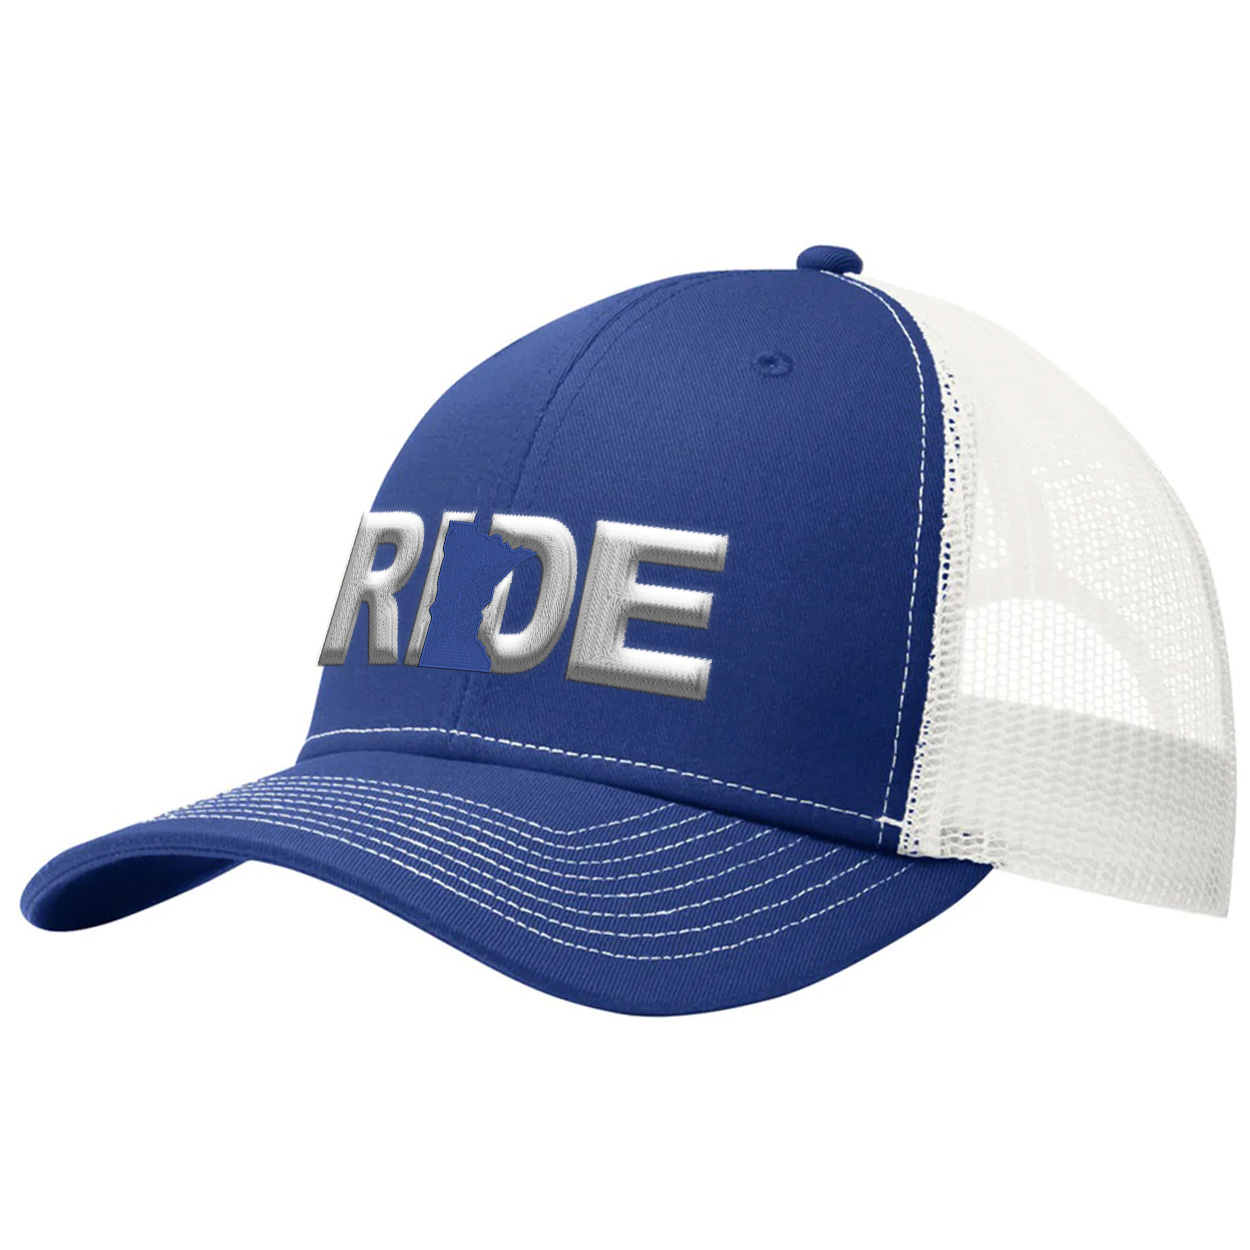 Ride Minnesota Classic Pro 3D Puff Embroidered Snapback Trucker Hat Blue/White